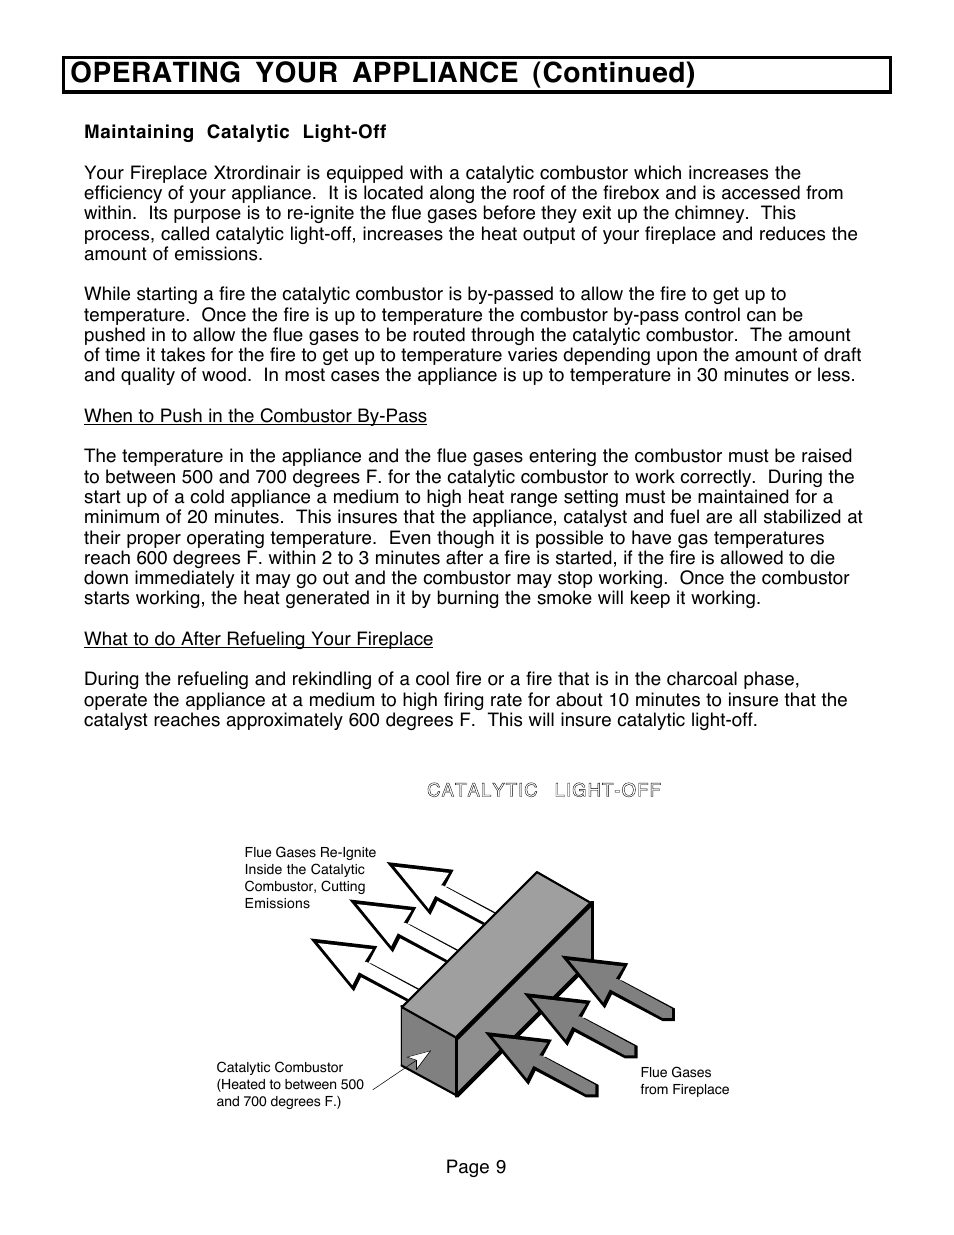 Operating your appliance (continued) | FireplaceXtrordinair 36A-BI User Manual | Page 9 / 30